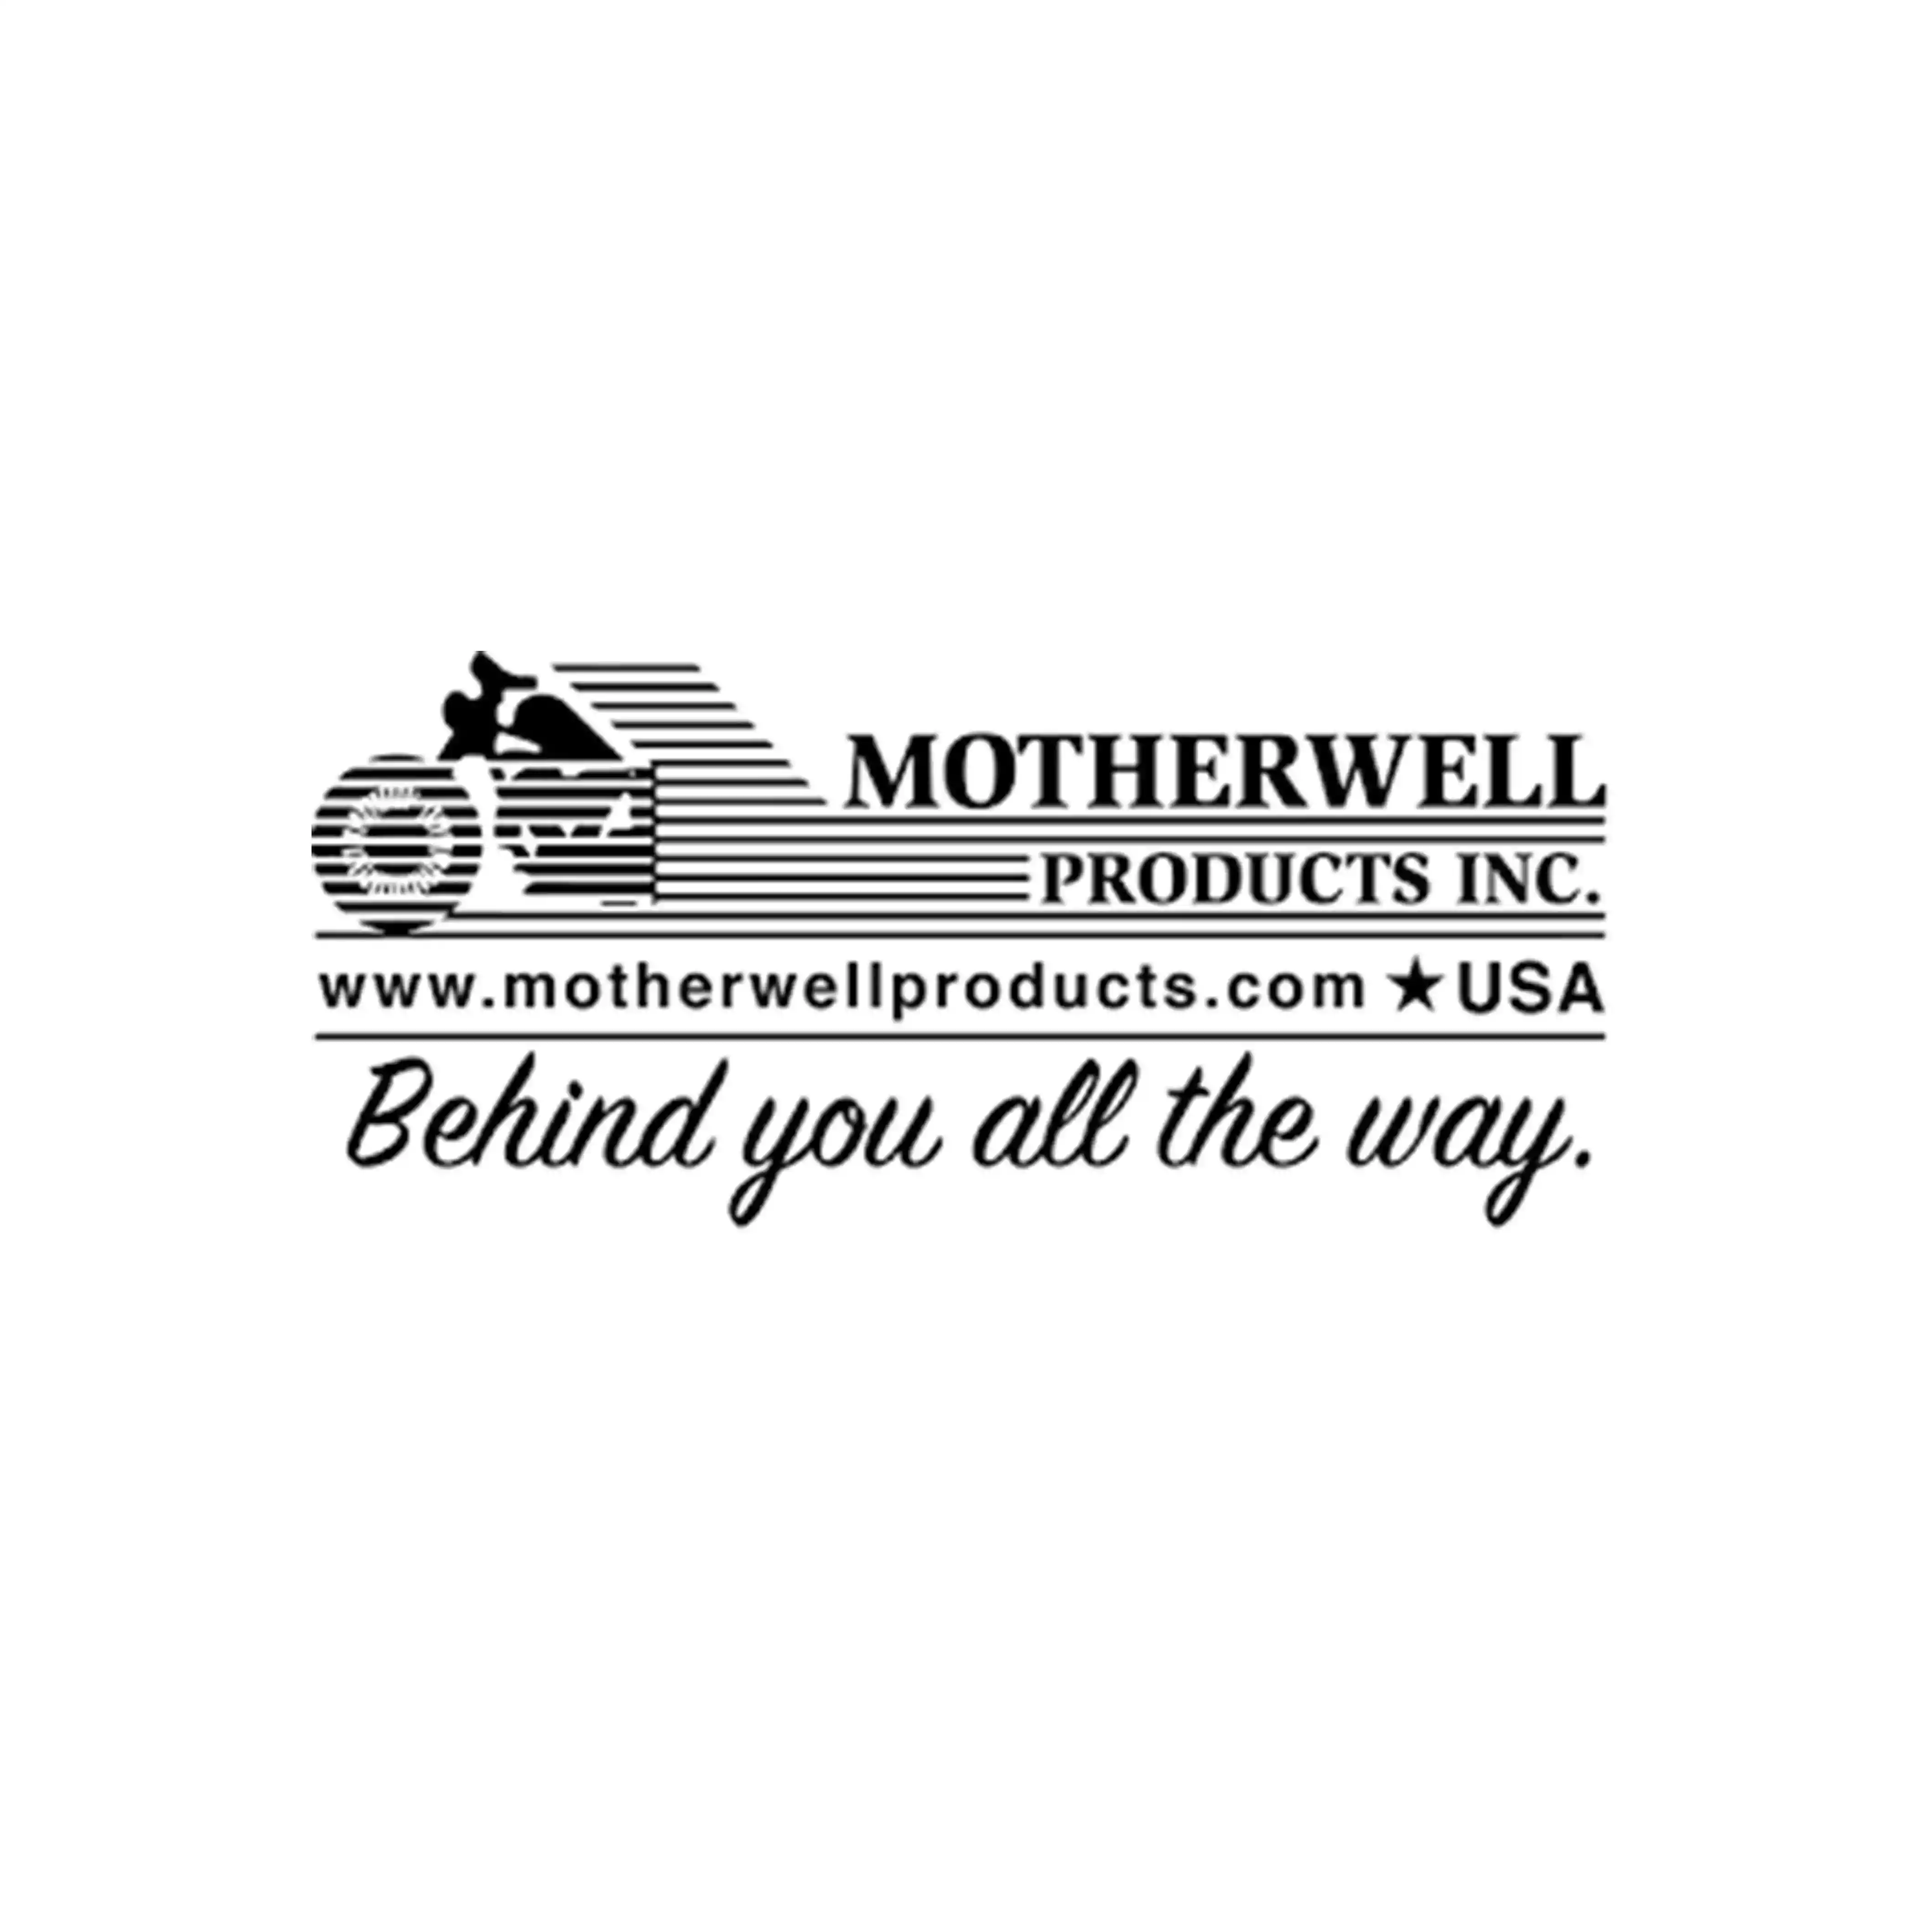 Motherwell Products